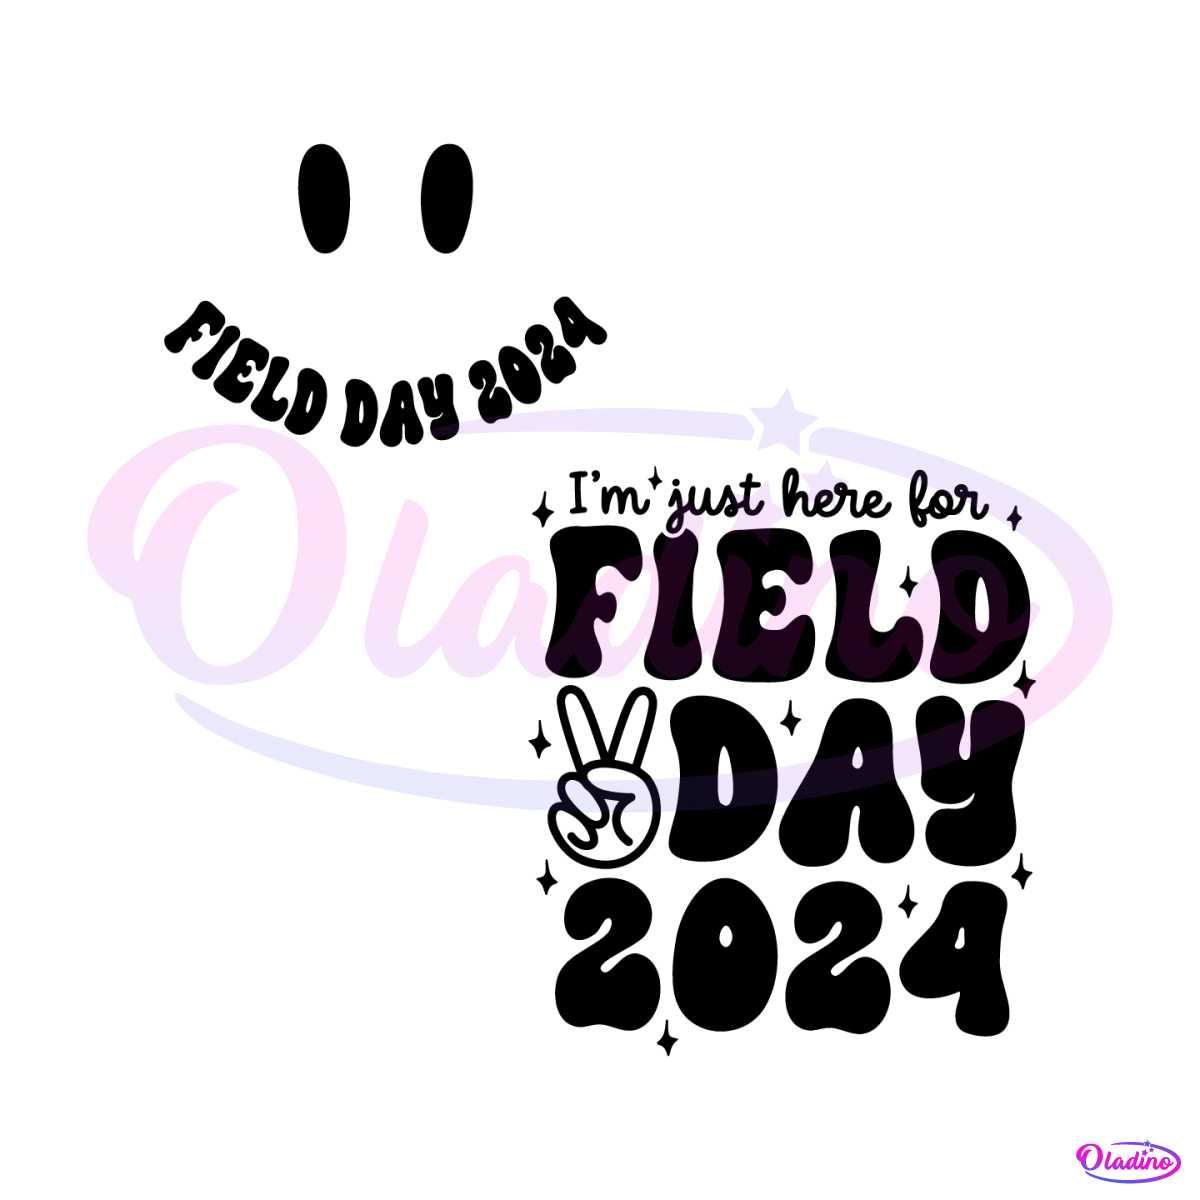 retro-im-just-here-for-field-day-2024-svg